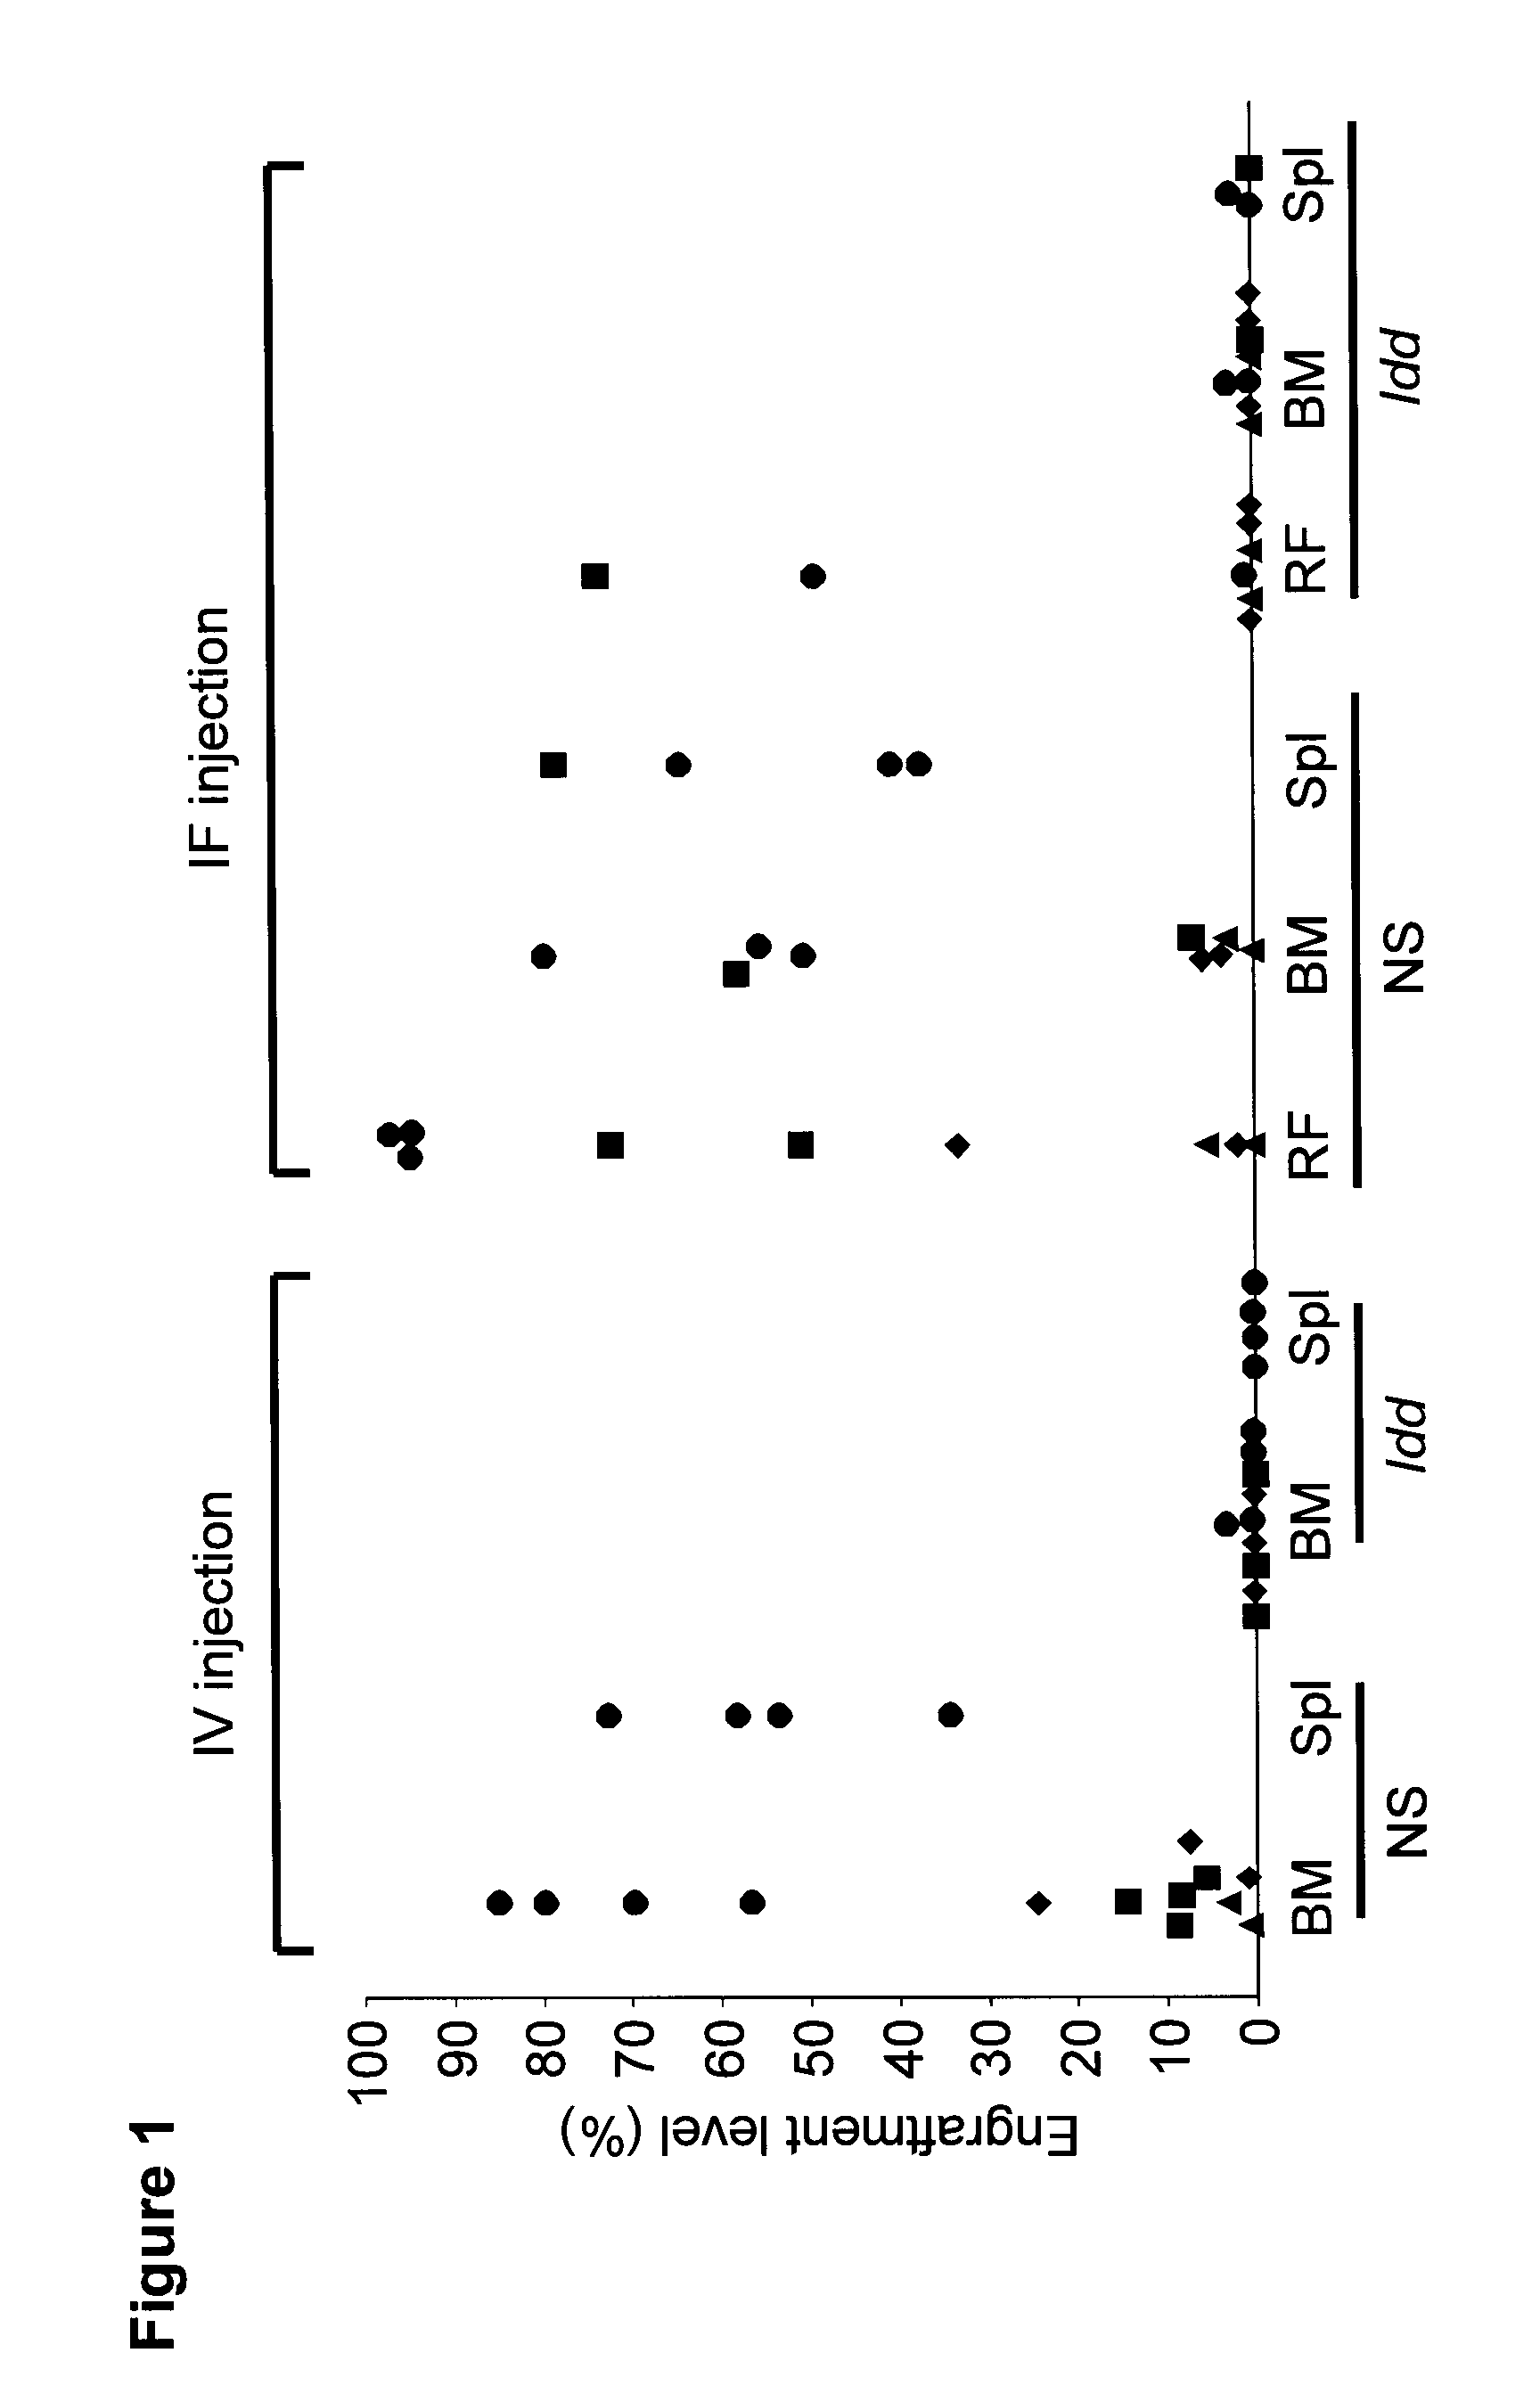 Compositions and Methods for Treating Hematological Cancers Targeting the SIRPA CD47 Interaction